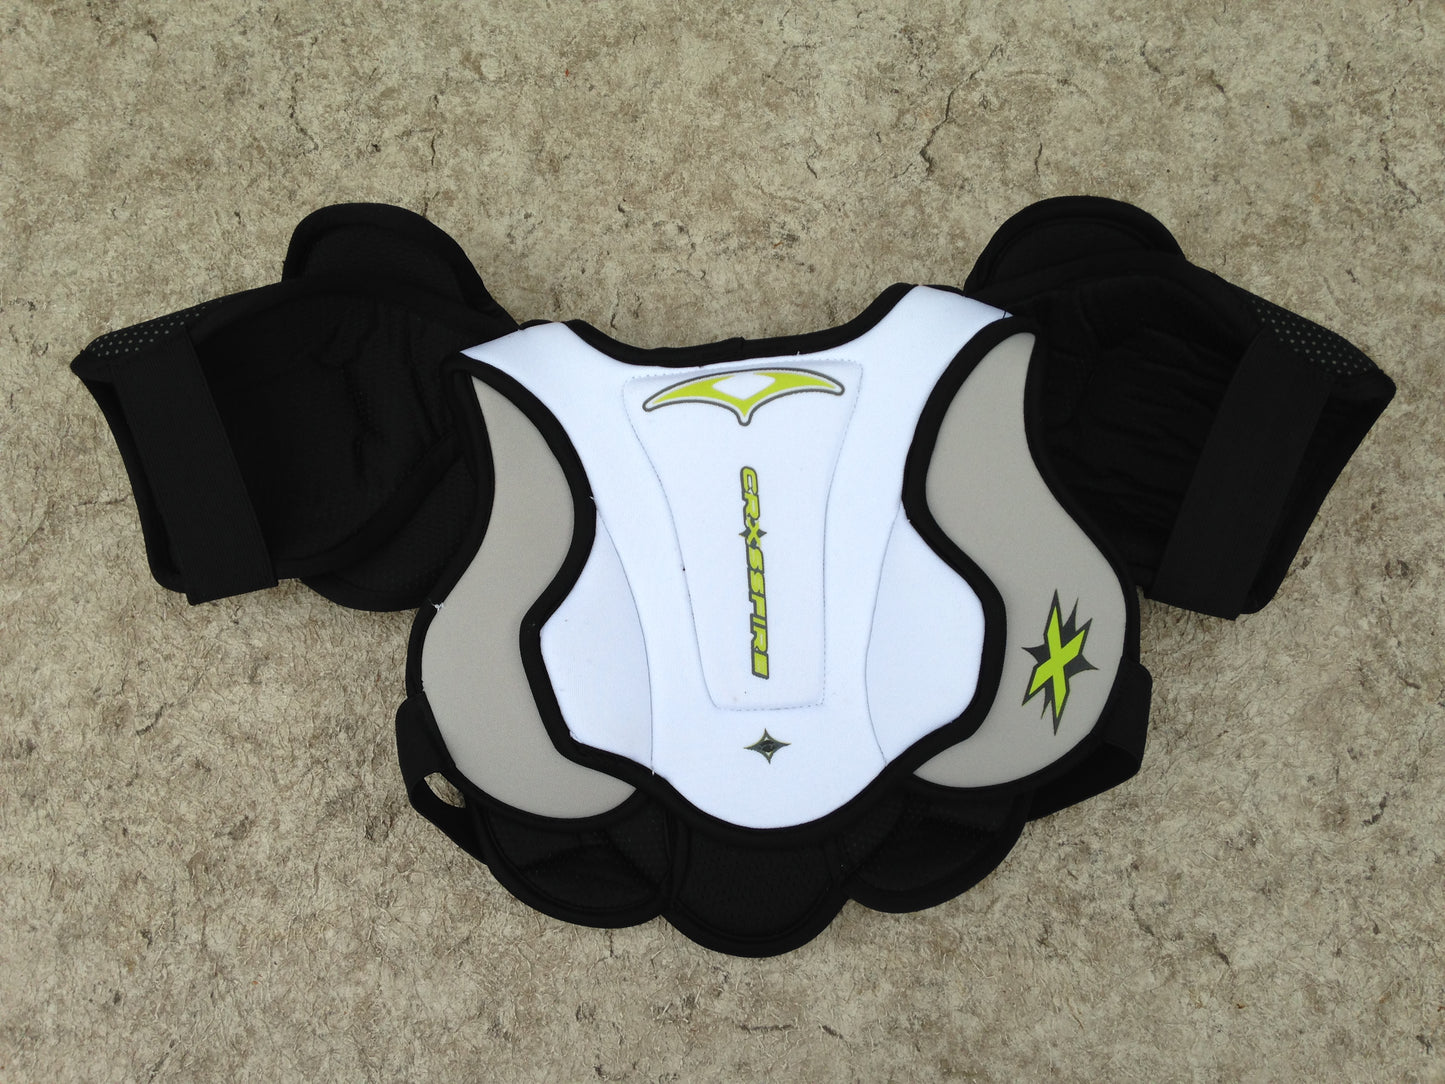 Hockey Shoulder Chest Pad Child Size Youth Medium 4-6 Vic Cross Fire Black White Lime